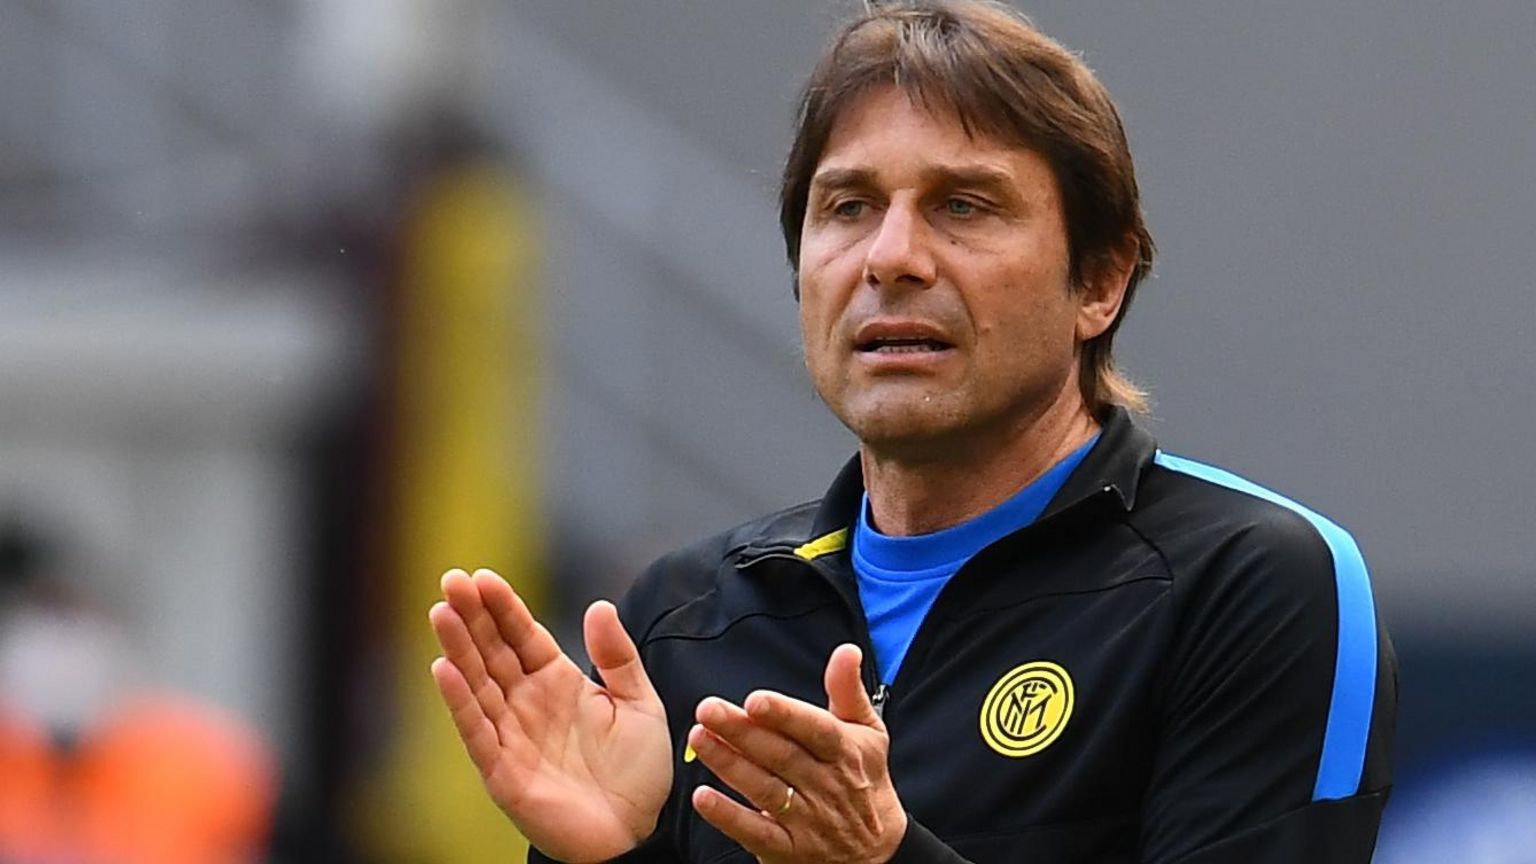 Antonio Conte encourages his players while in charge of Inter Milan